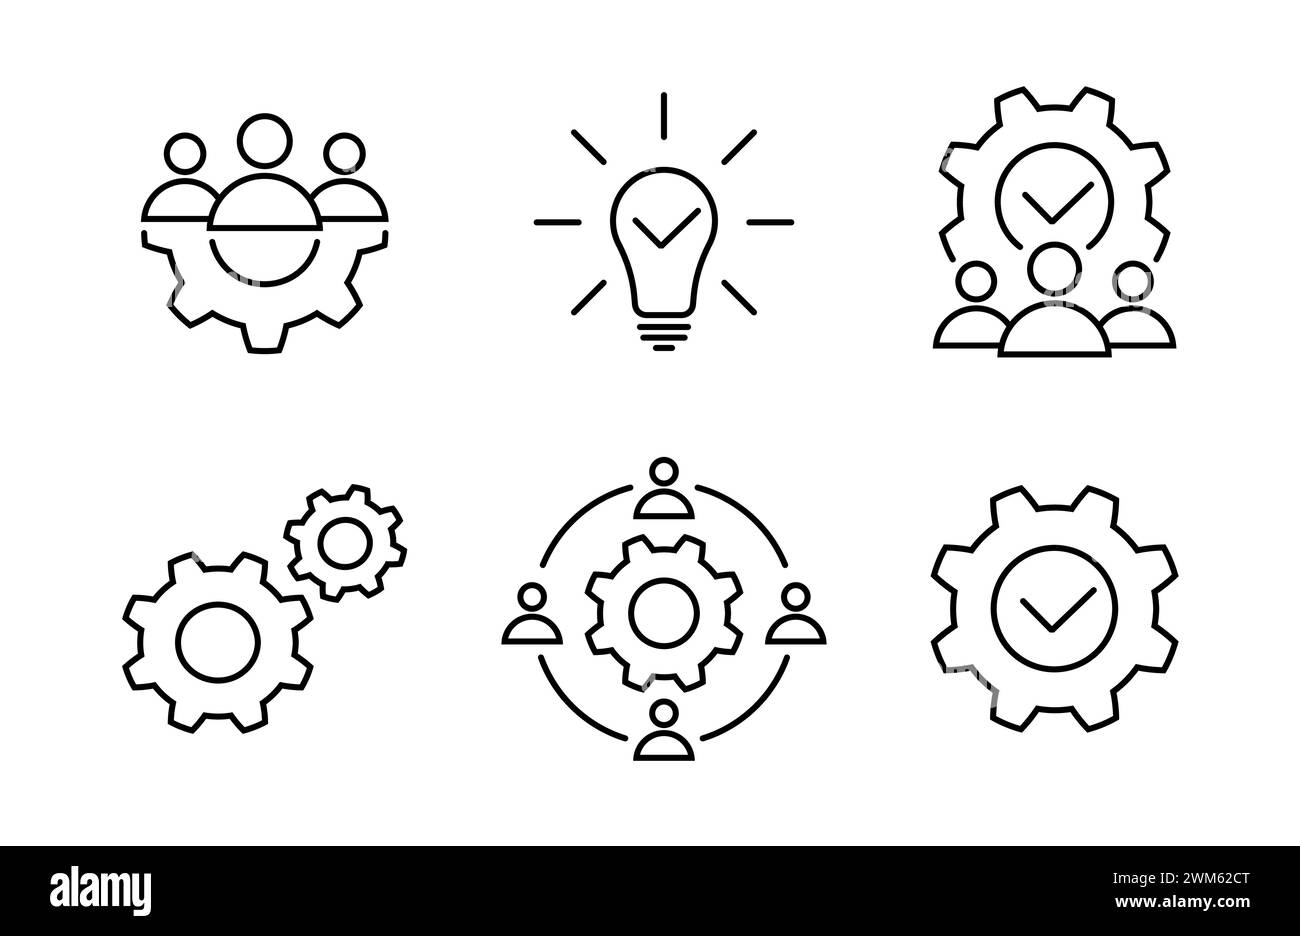 Leadership, creative, process and brainstorming symbols in flat style. Business line icon set on a white background. Simple abstract icons. Vector ill Stock Vector